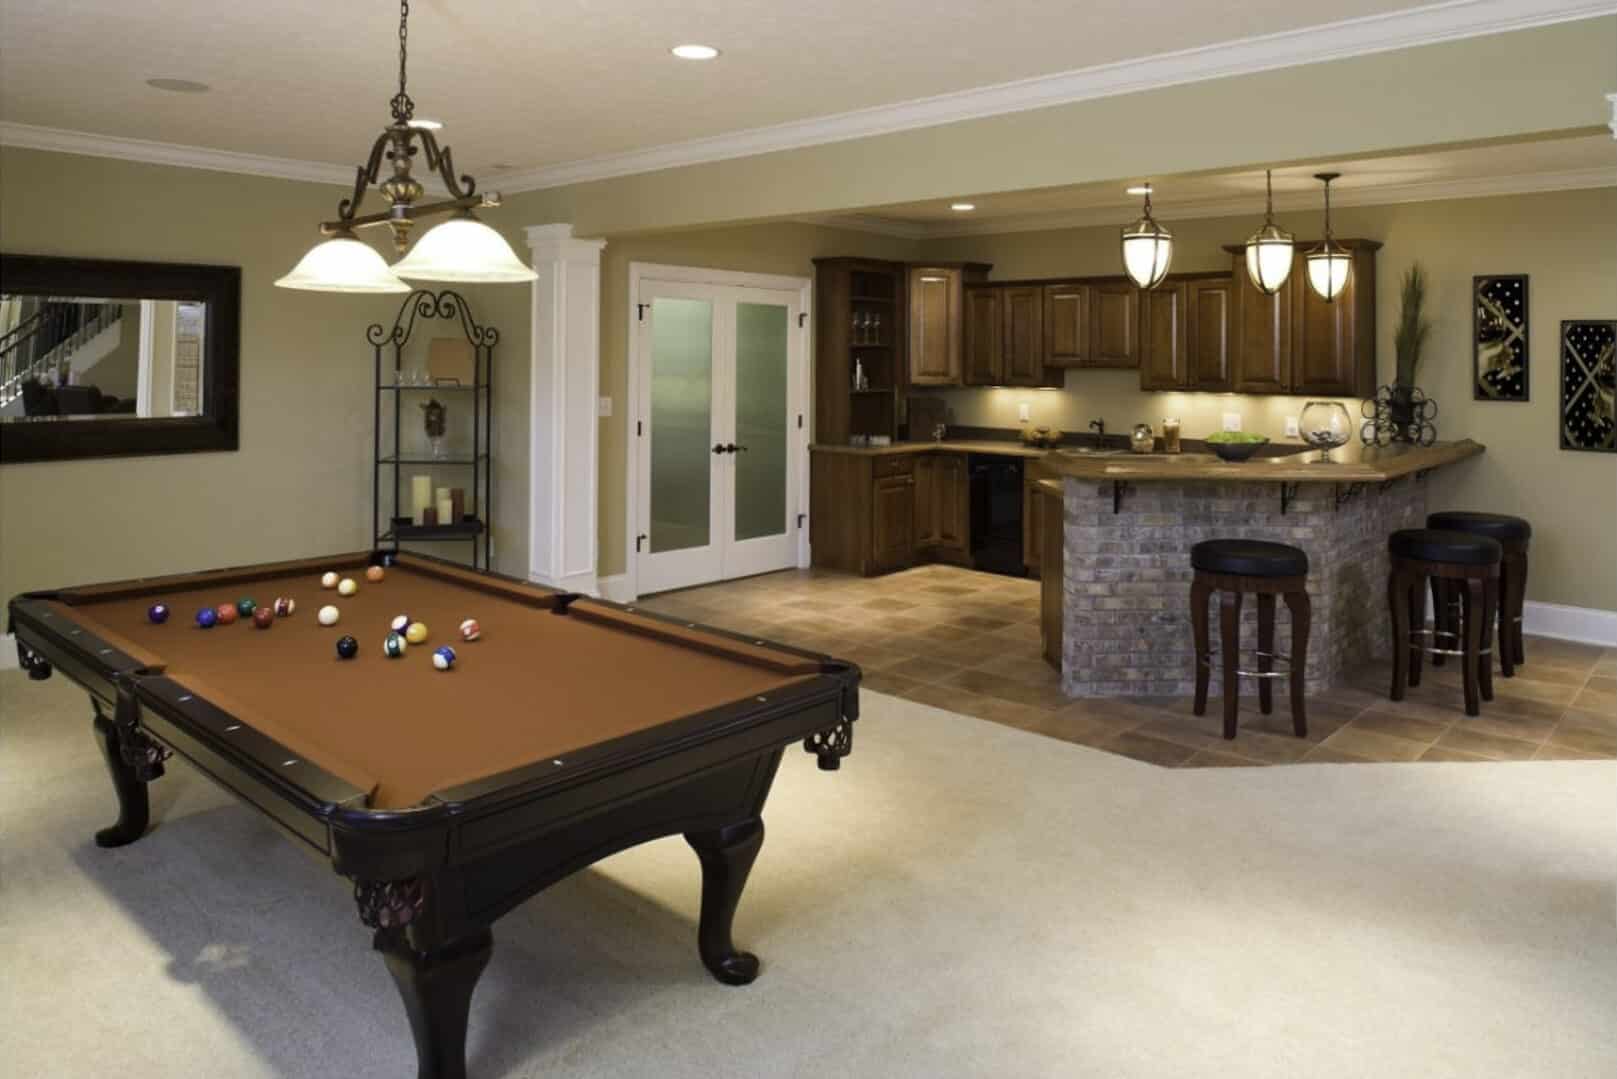 A basement that was turned into an extra room for entertaining with a pool table and kitchen. 